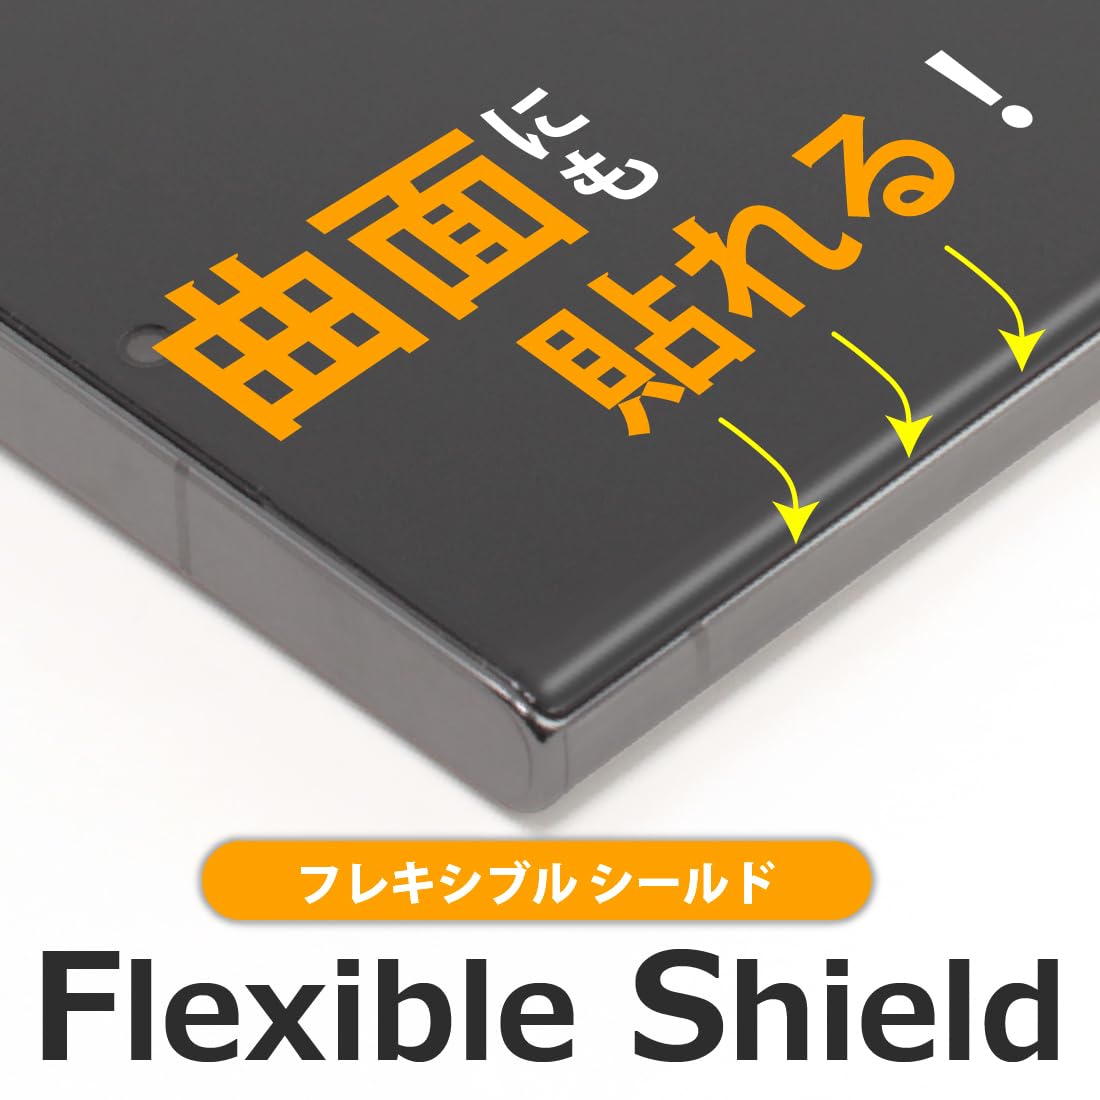 PDA atelier Google Pixel Fold correspondence Flexible Shield[ lustre ] protection film [ main screen for ] bending surface correspondence made in Japan 